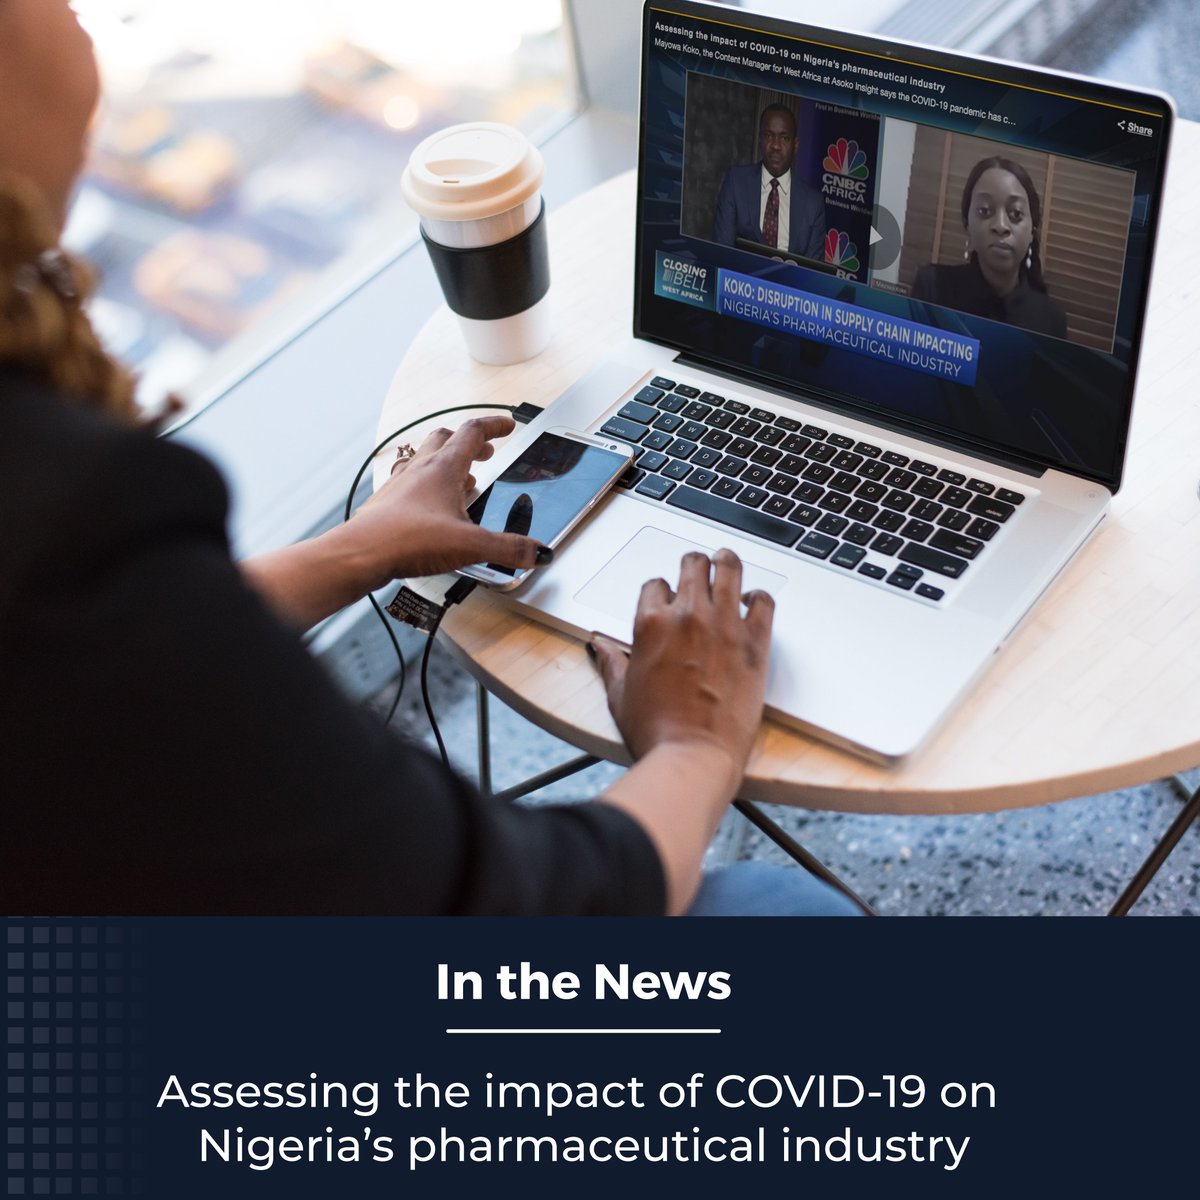 Cre Venture Capital Mayowa Koko The Content Manager For West Africa At Asoko Insight Assesses The Impact Of Covid 19 On Nigeria S Pharmaceutical Industry Watch The Video Here T Co Gtskt3qsw6 Cre Venturecapital